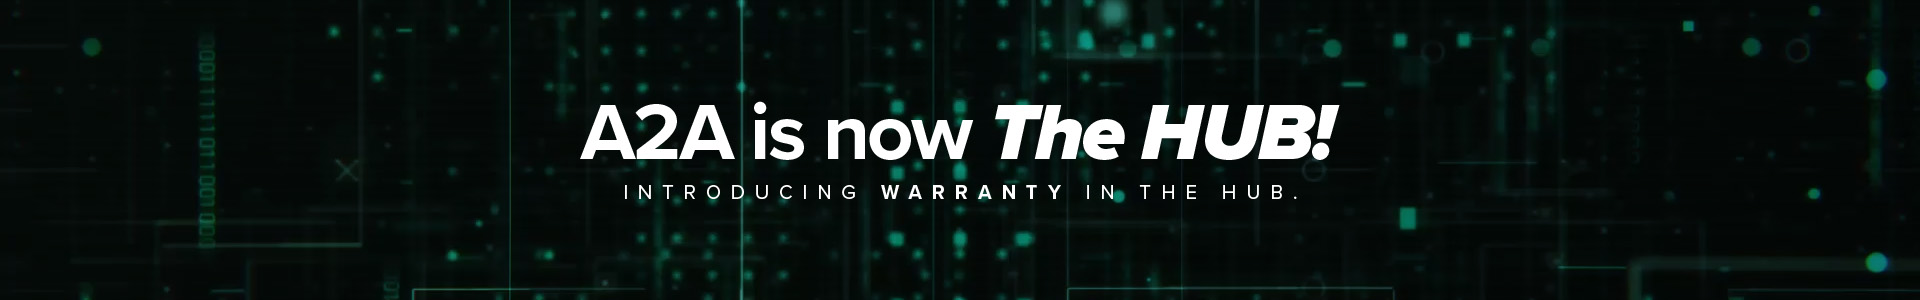 banner image of transition of Access to Answer, the warranty portal to the HUB